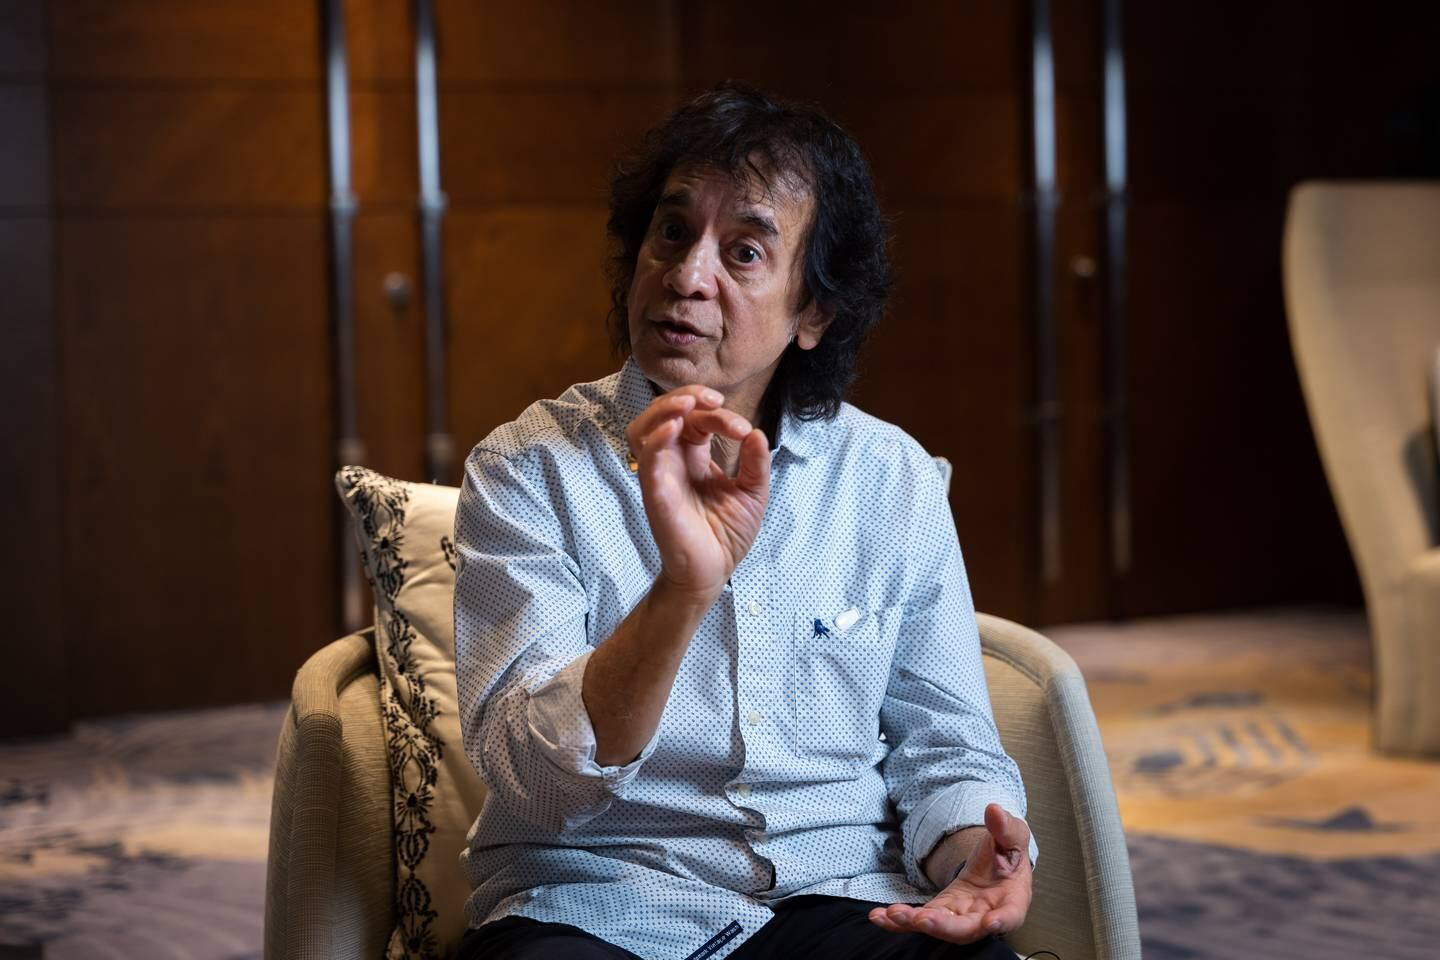 Zakir Hussain speaks to 'The National' from the Aga Khan Music Awards in Muscat Oman. Photo: Christopher Wilton-Steer